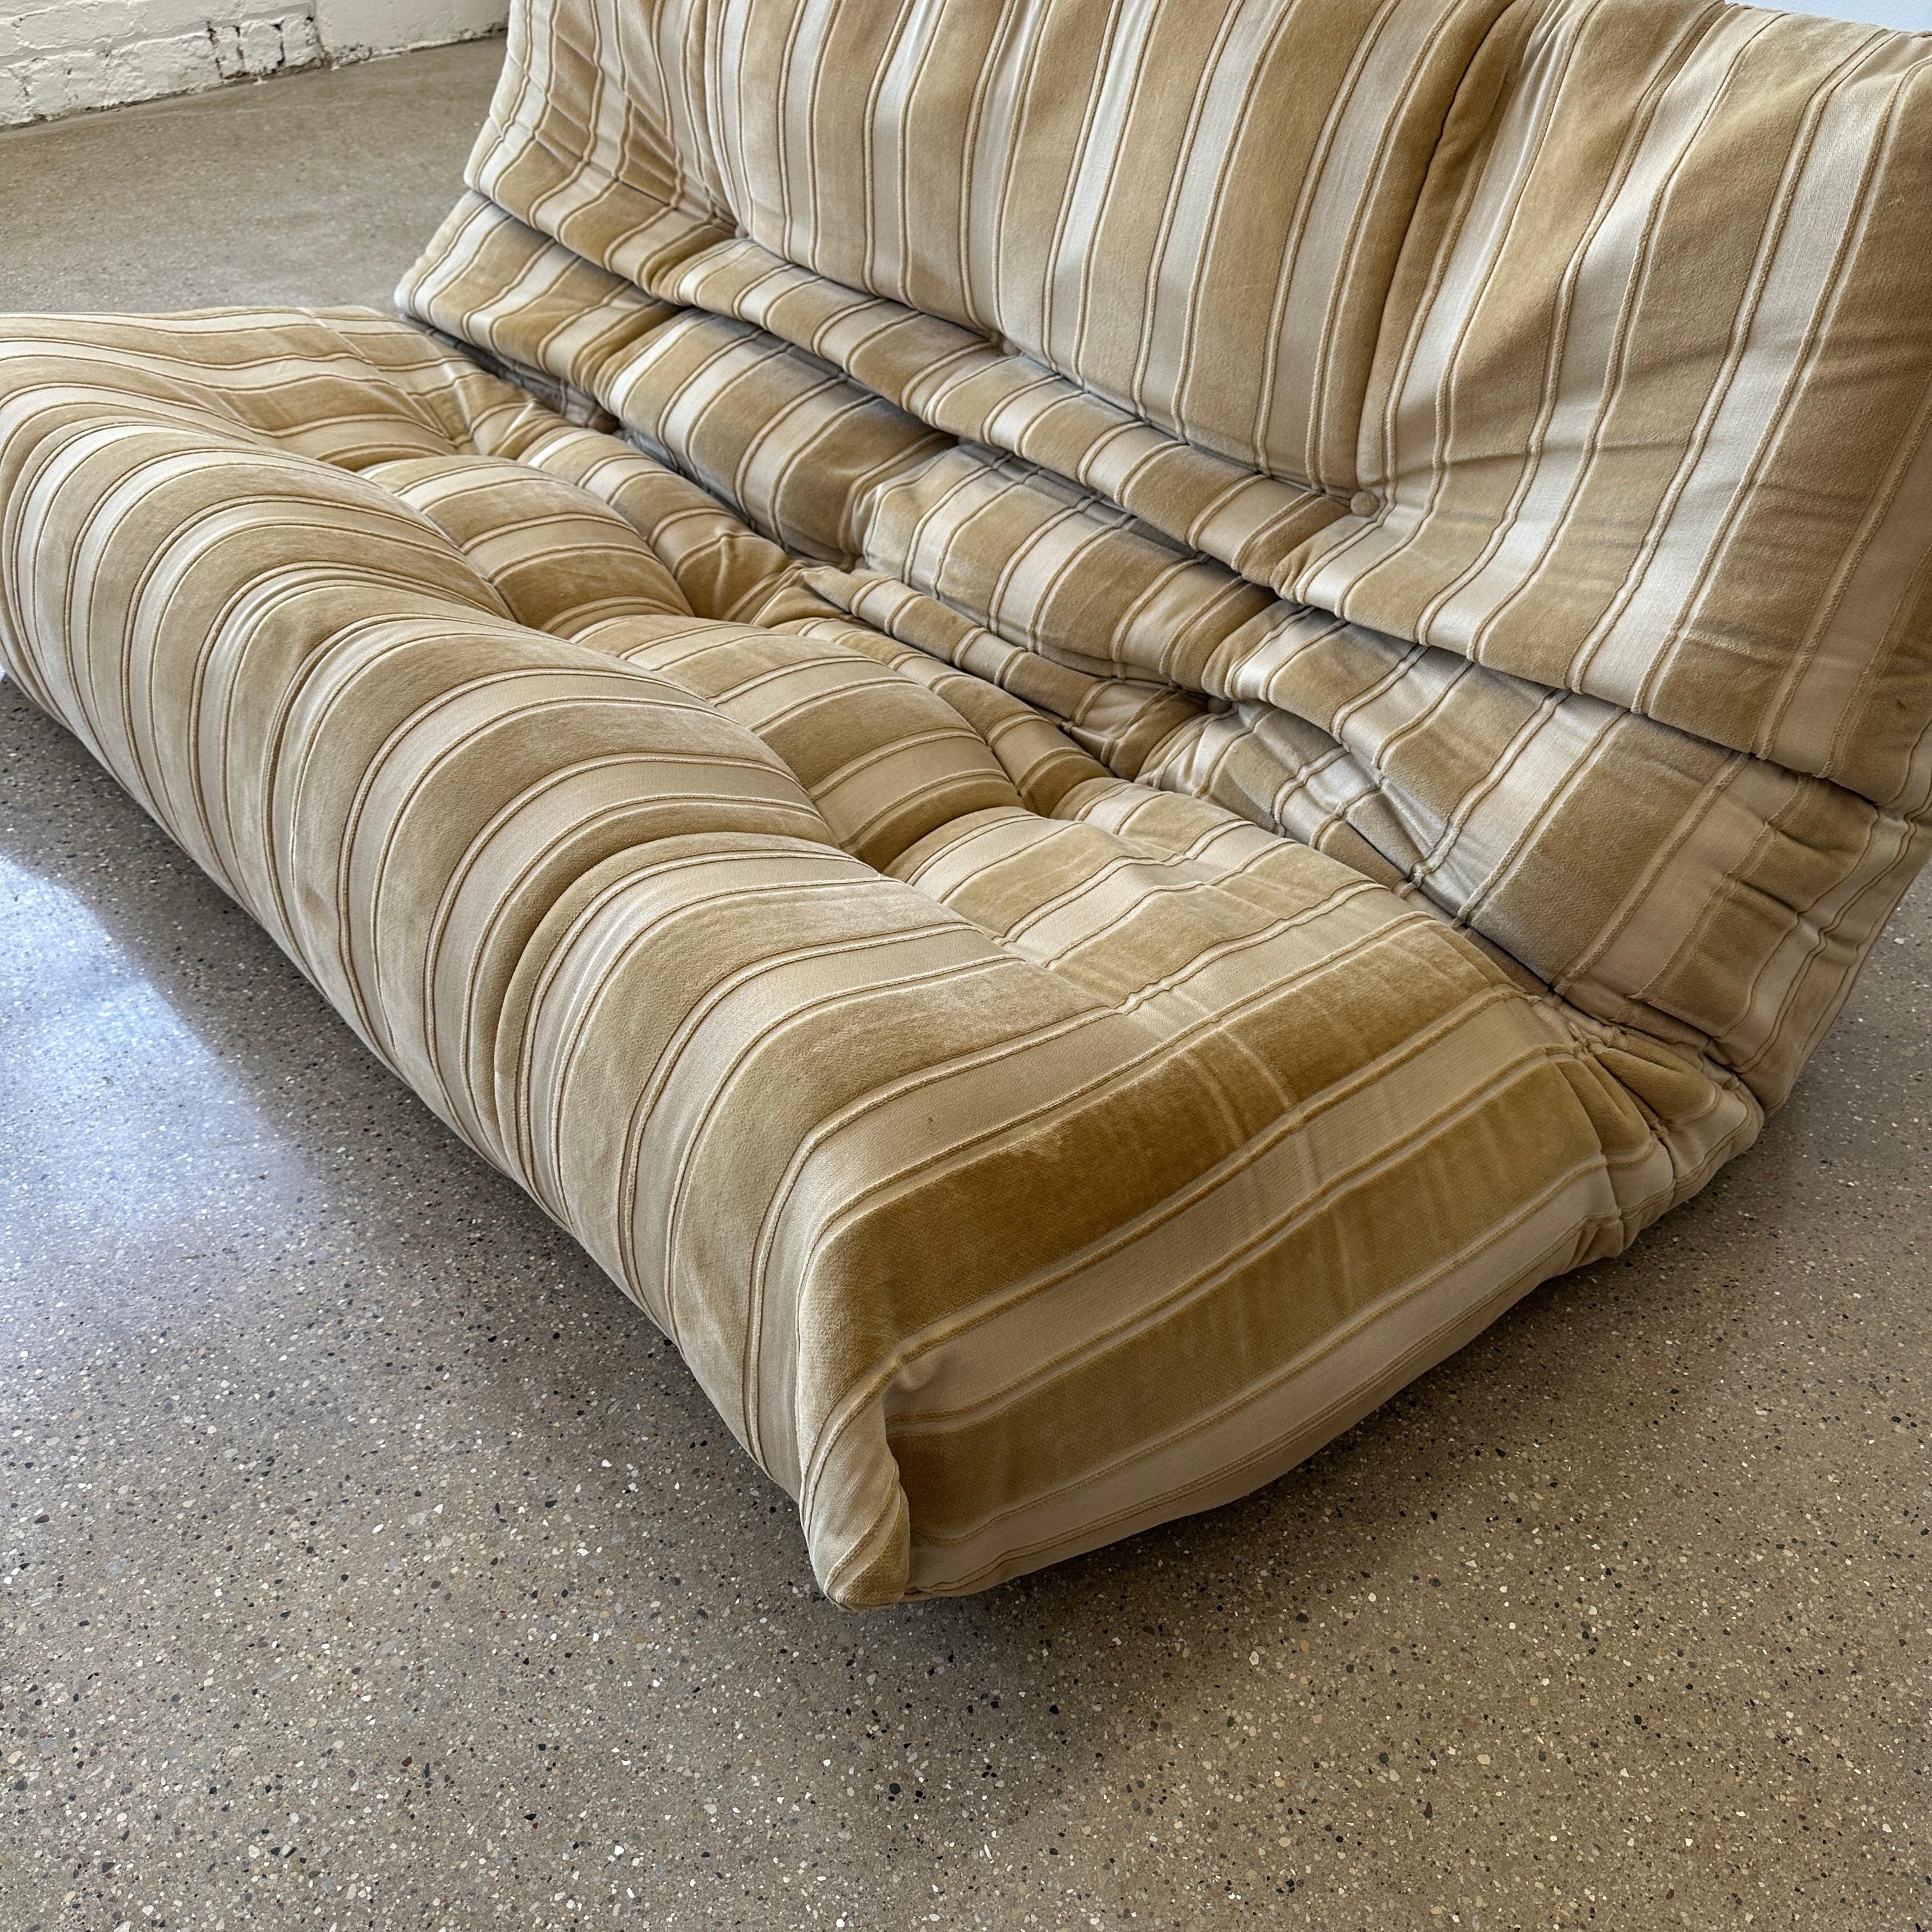 Michael Ducaroy “Togo” Sofa In Good Condition For Sale In Chicago, IL